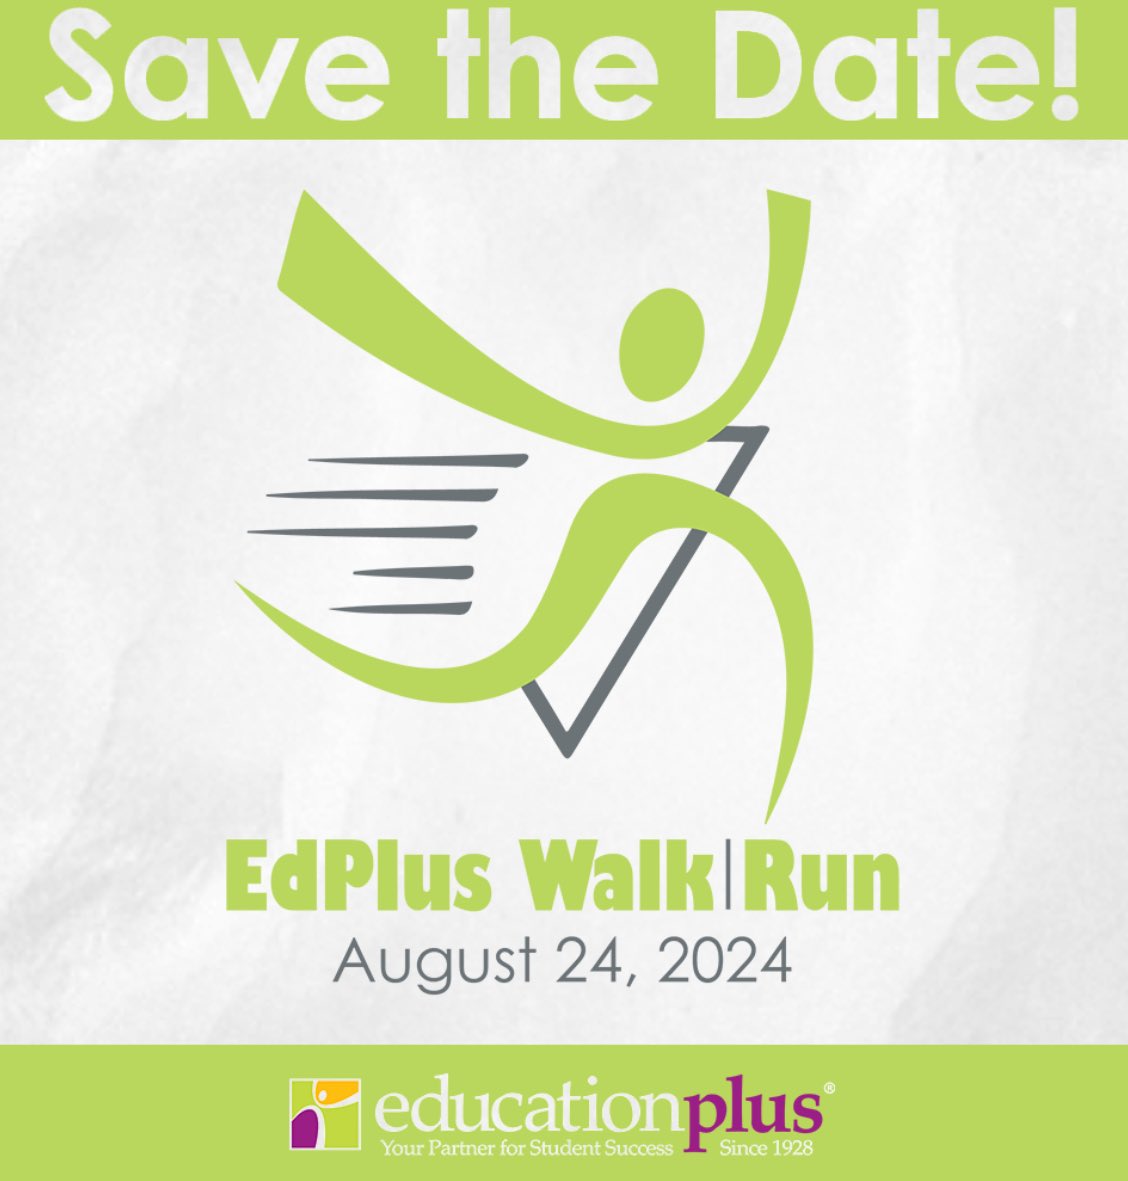 I am beyond excited to share this @EducPlus Welness Committee news! We’re hosting our first EducationPlus Family Walk/Run in August! Come and #RunWithEddy! @jf_converse @Tanie1403 @RobGreenhaw @Erin_Lawson3 @Gegeb63 @StLouisRPDC @skulpa  @jleeTechPercent @ReneeTrotier